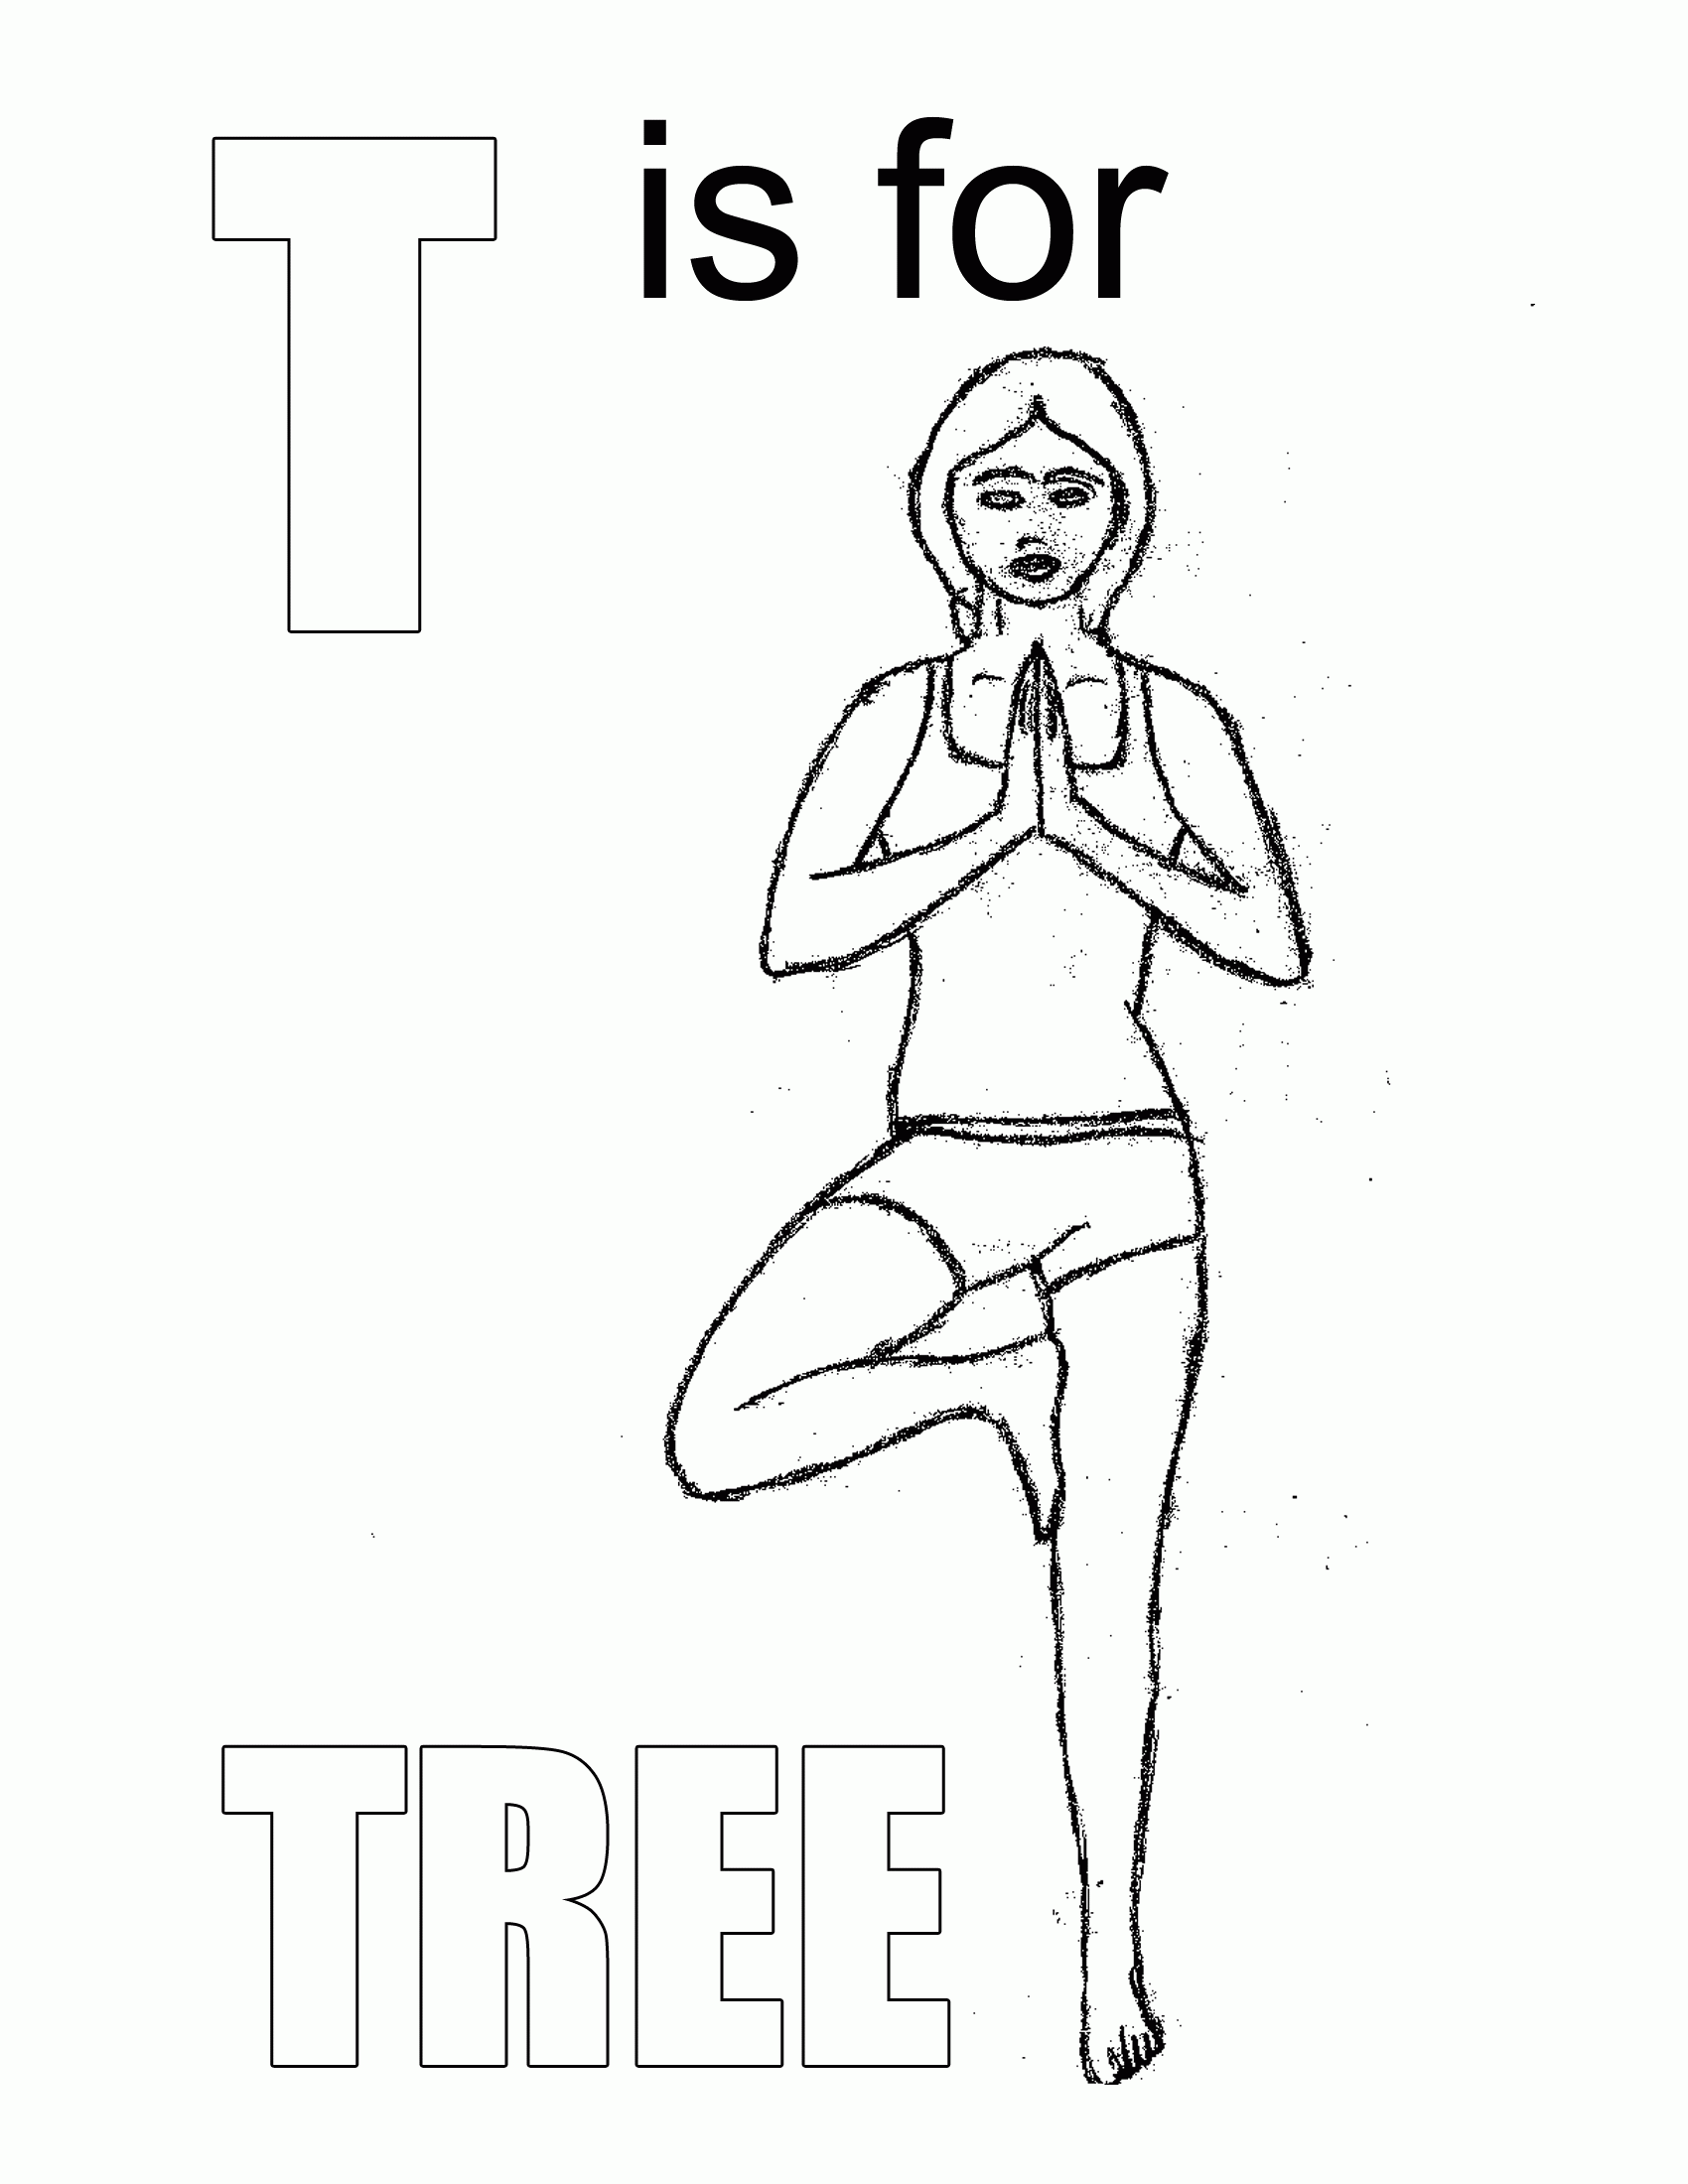 Bedtime Yoga Coloring Pages for Kids, Kids Party Games, Mindfulness,  Relaxation, Brainbreak Activities, Homeschool Printable SEL Activity - Etsy